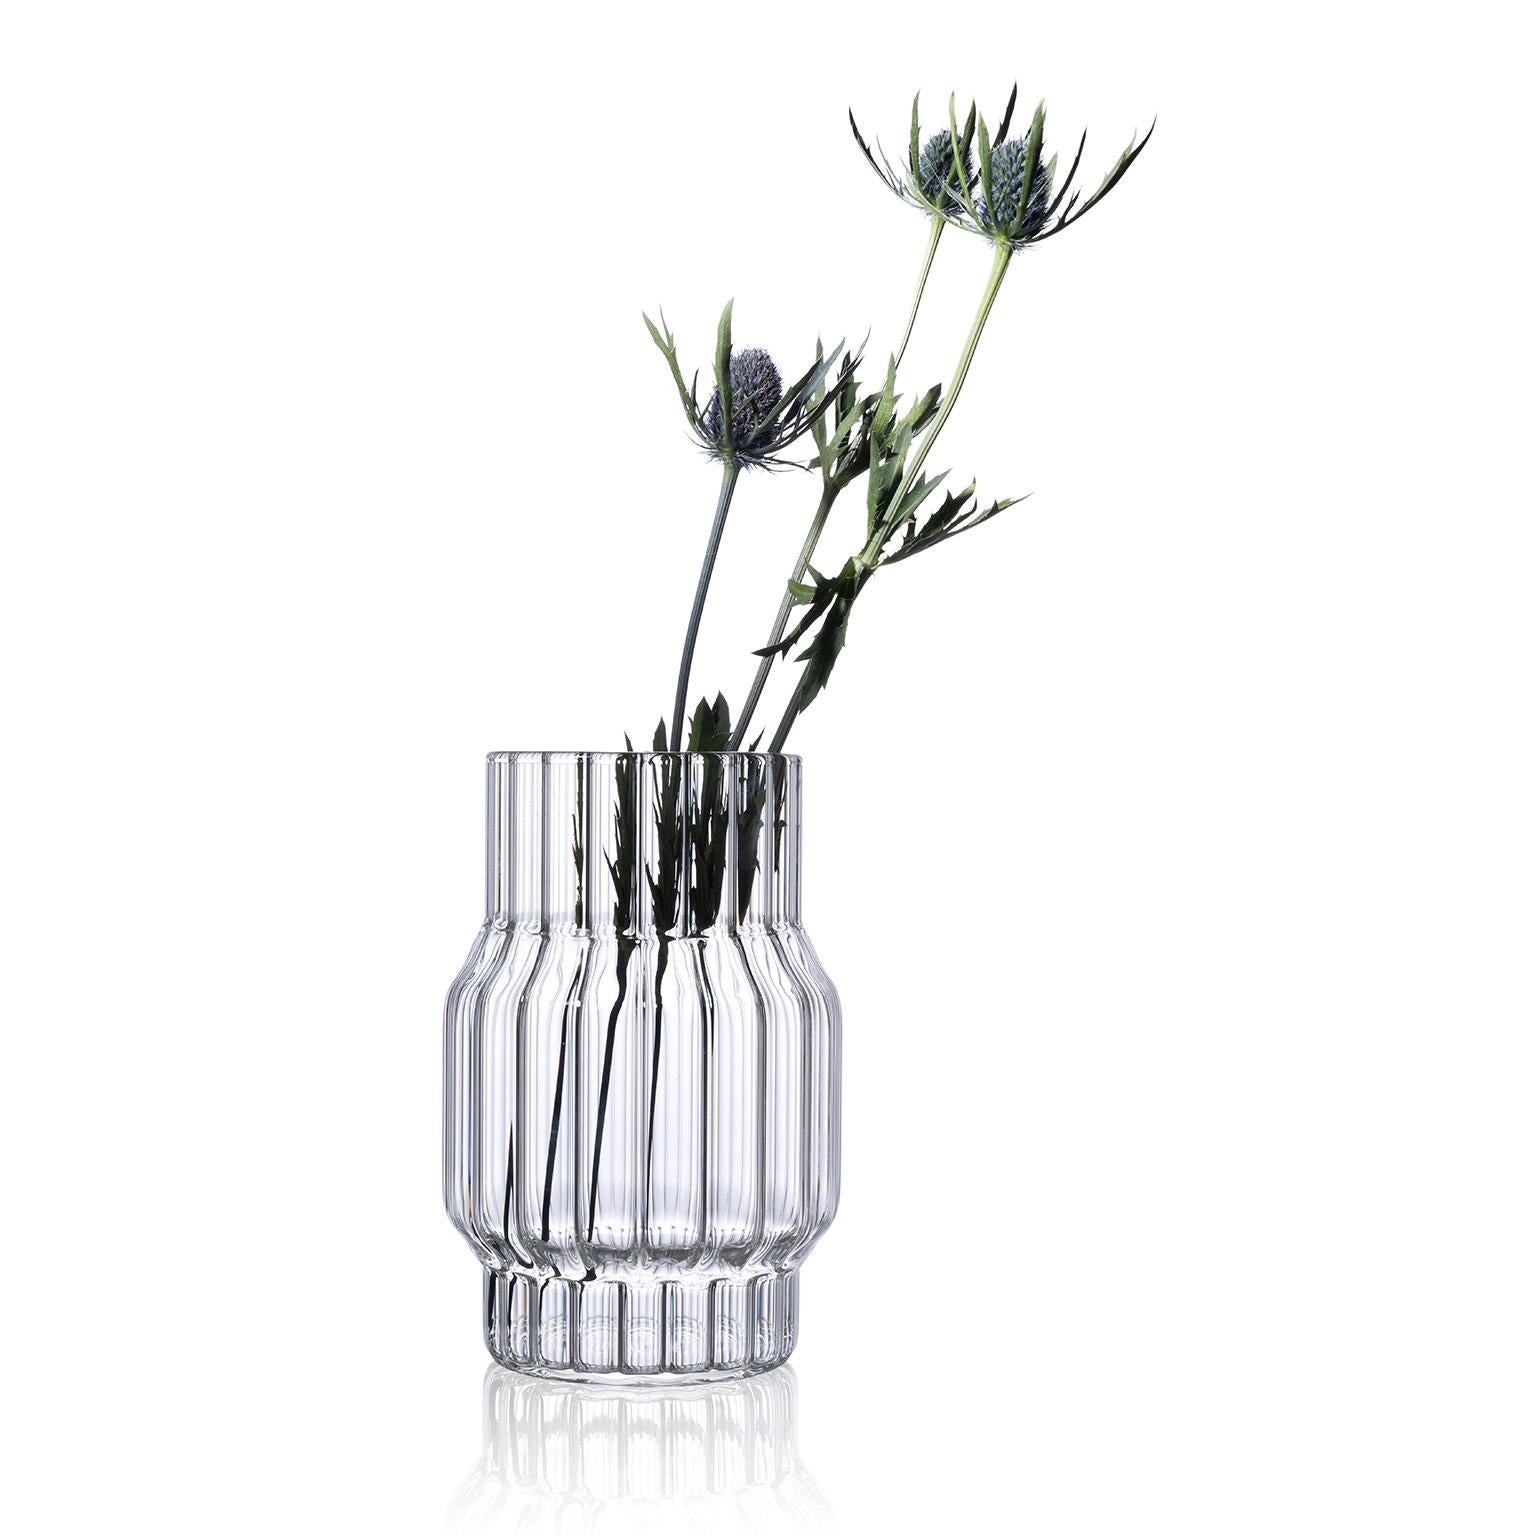 The Albany vase collection inverts tradition with the intricate fluting detail on the interior of the vase. The strong, simple lines of the vases make these perfect for any interior. Each one is handcrafted without the use of molds. Suits any modern